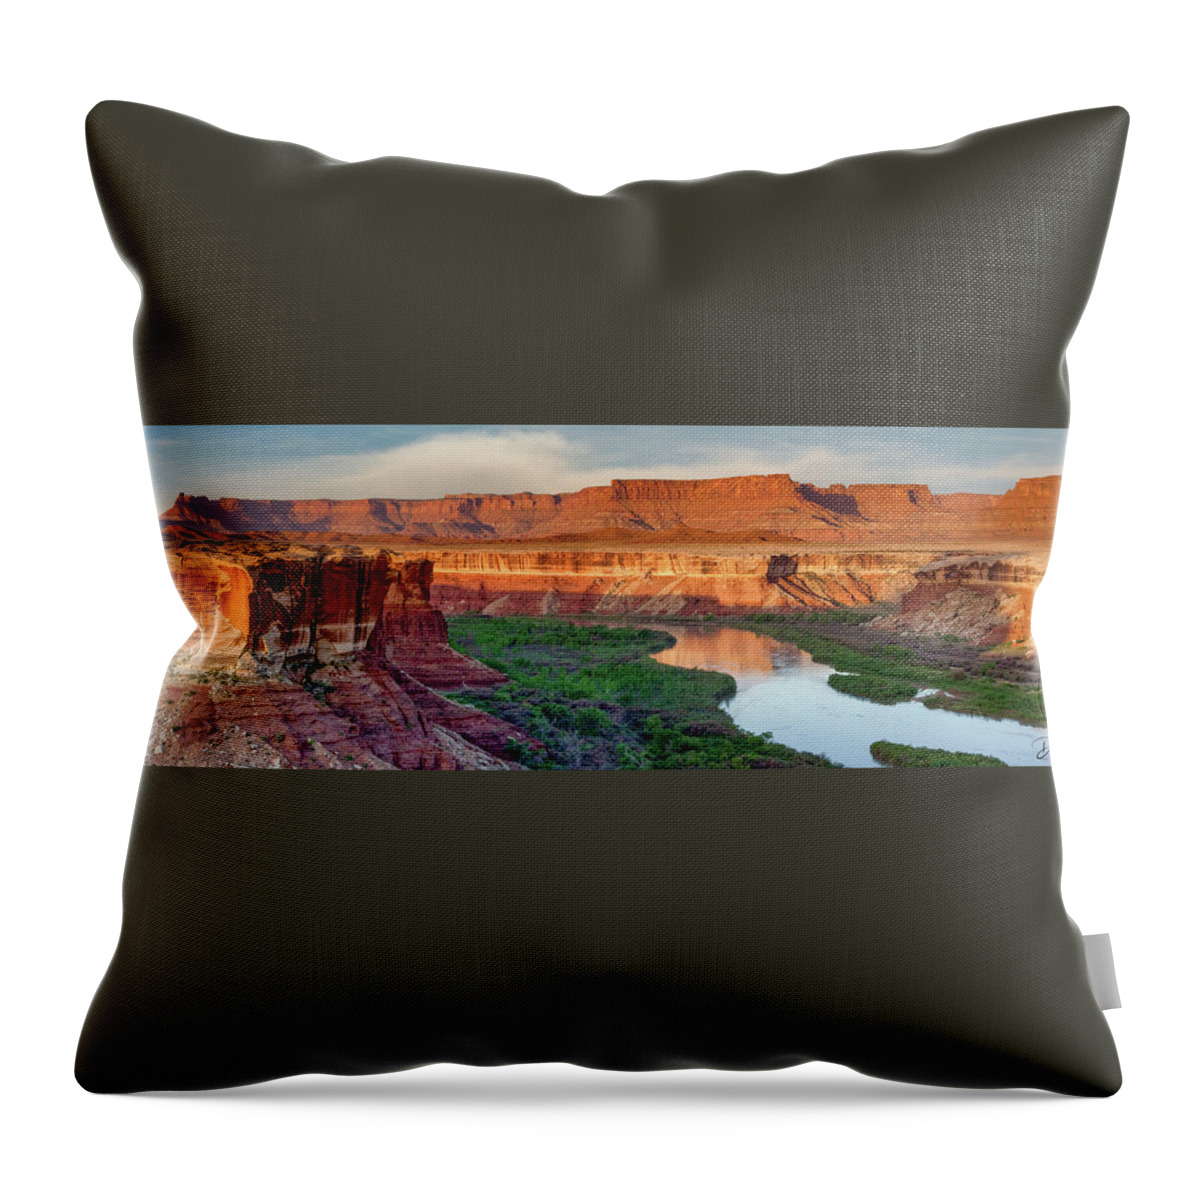 Greenriver Desert Canyonlands River Panorama Reflection Colorado Plateau Throw Pillow featuring the photograph Green River from White Rim Trail by Dan Norris